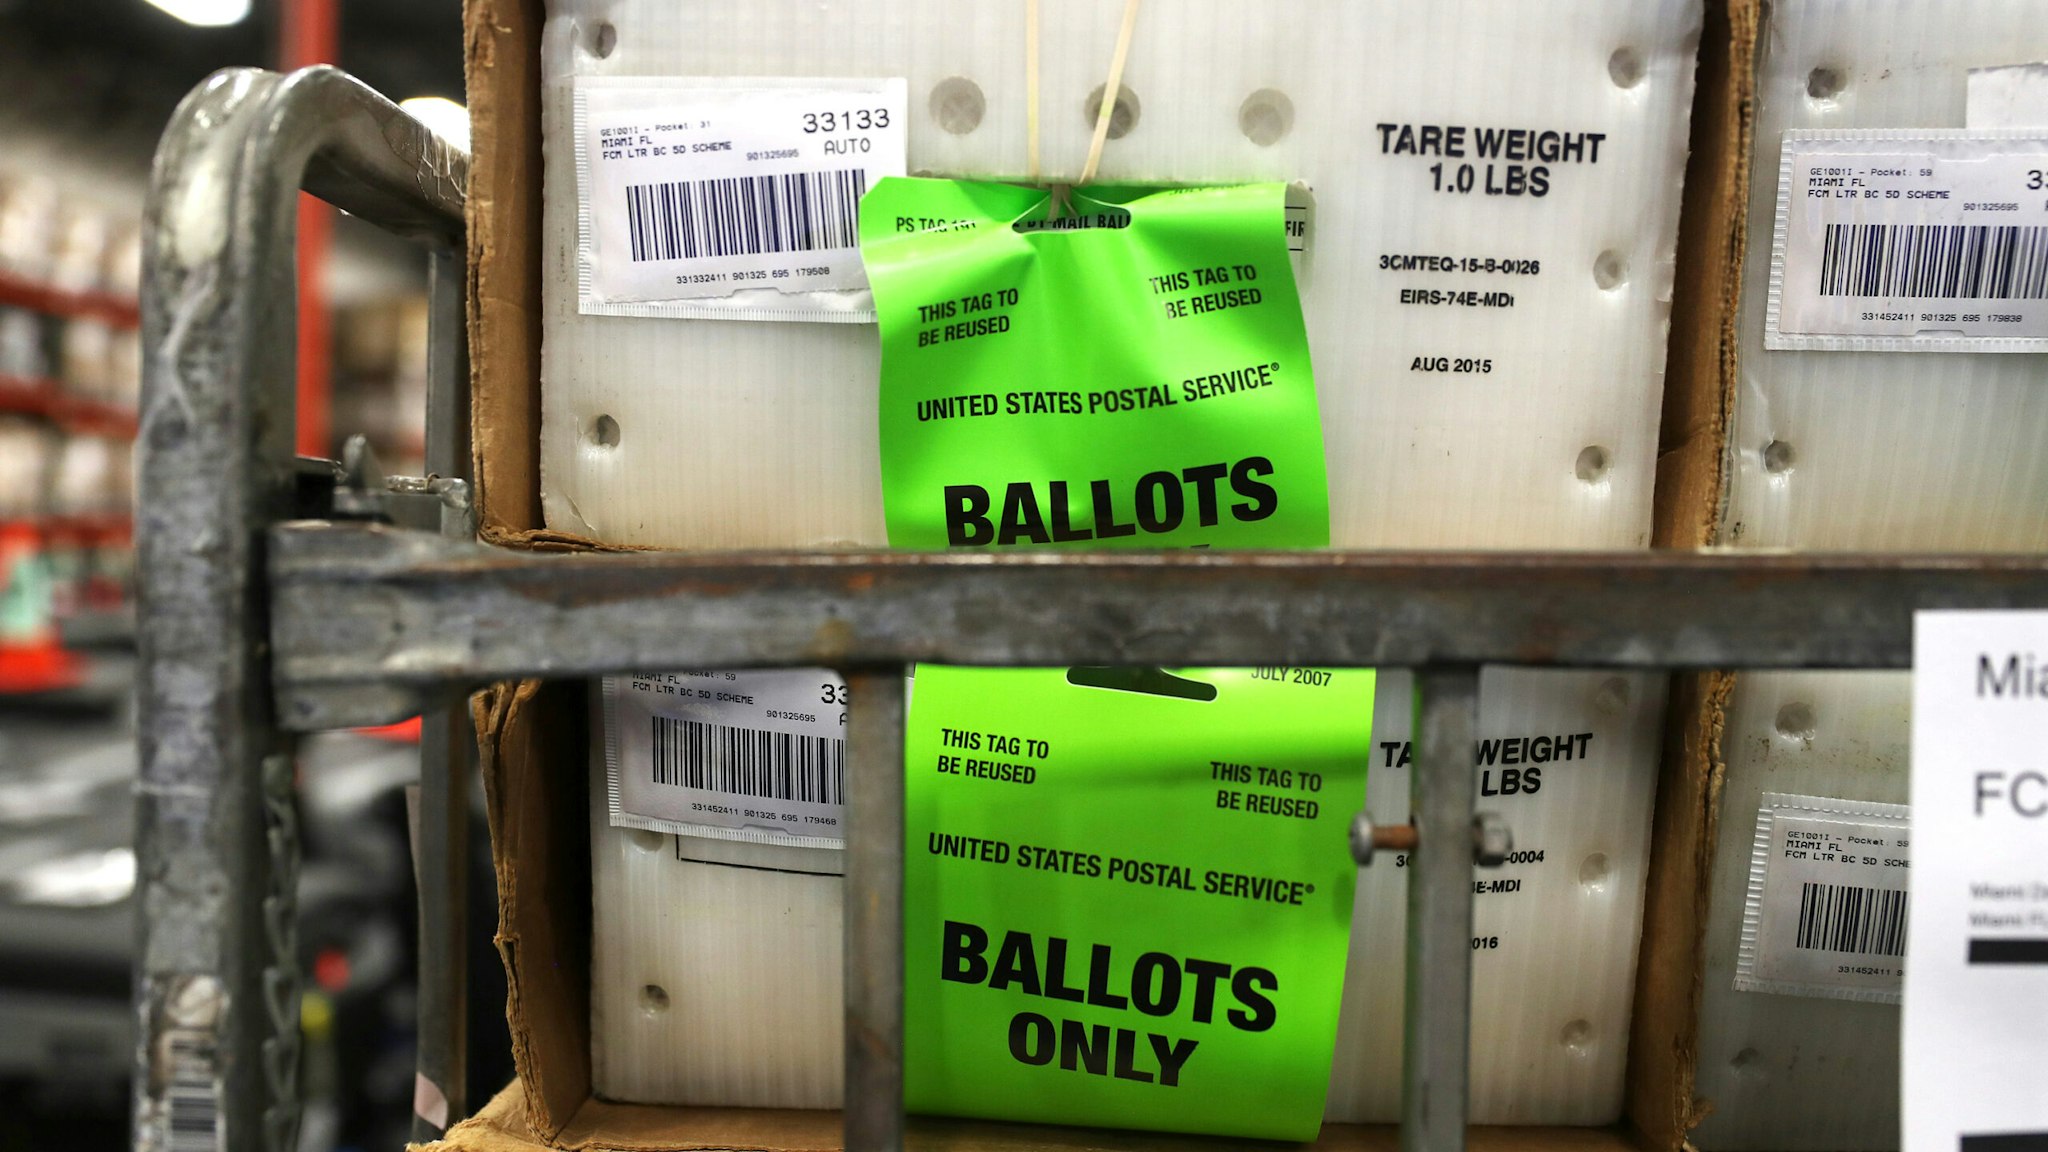 DORAL, FLORIDA - OCTOBER 01: Boxes with ballots are seen at the Miami-Dade County Election Department as the vote-by-mail ballots are placed on to a U.S. Post Office truck to be delivered to voters on October 01, 2020 in Doral, Florida. The Miami-Dade County Elections Department mailed out more than 530,000 vote-by-mail ballots to voters with a request on file for the November 3, 2020 General Election.